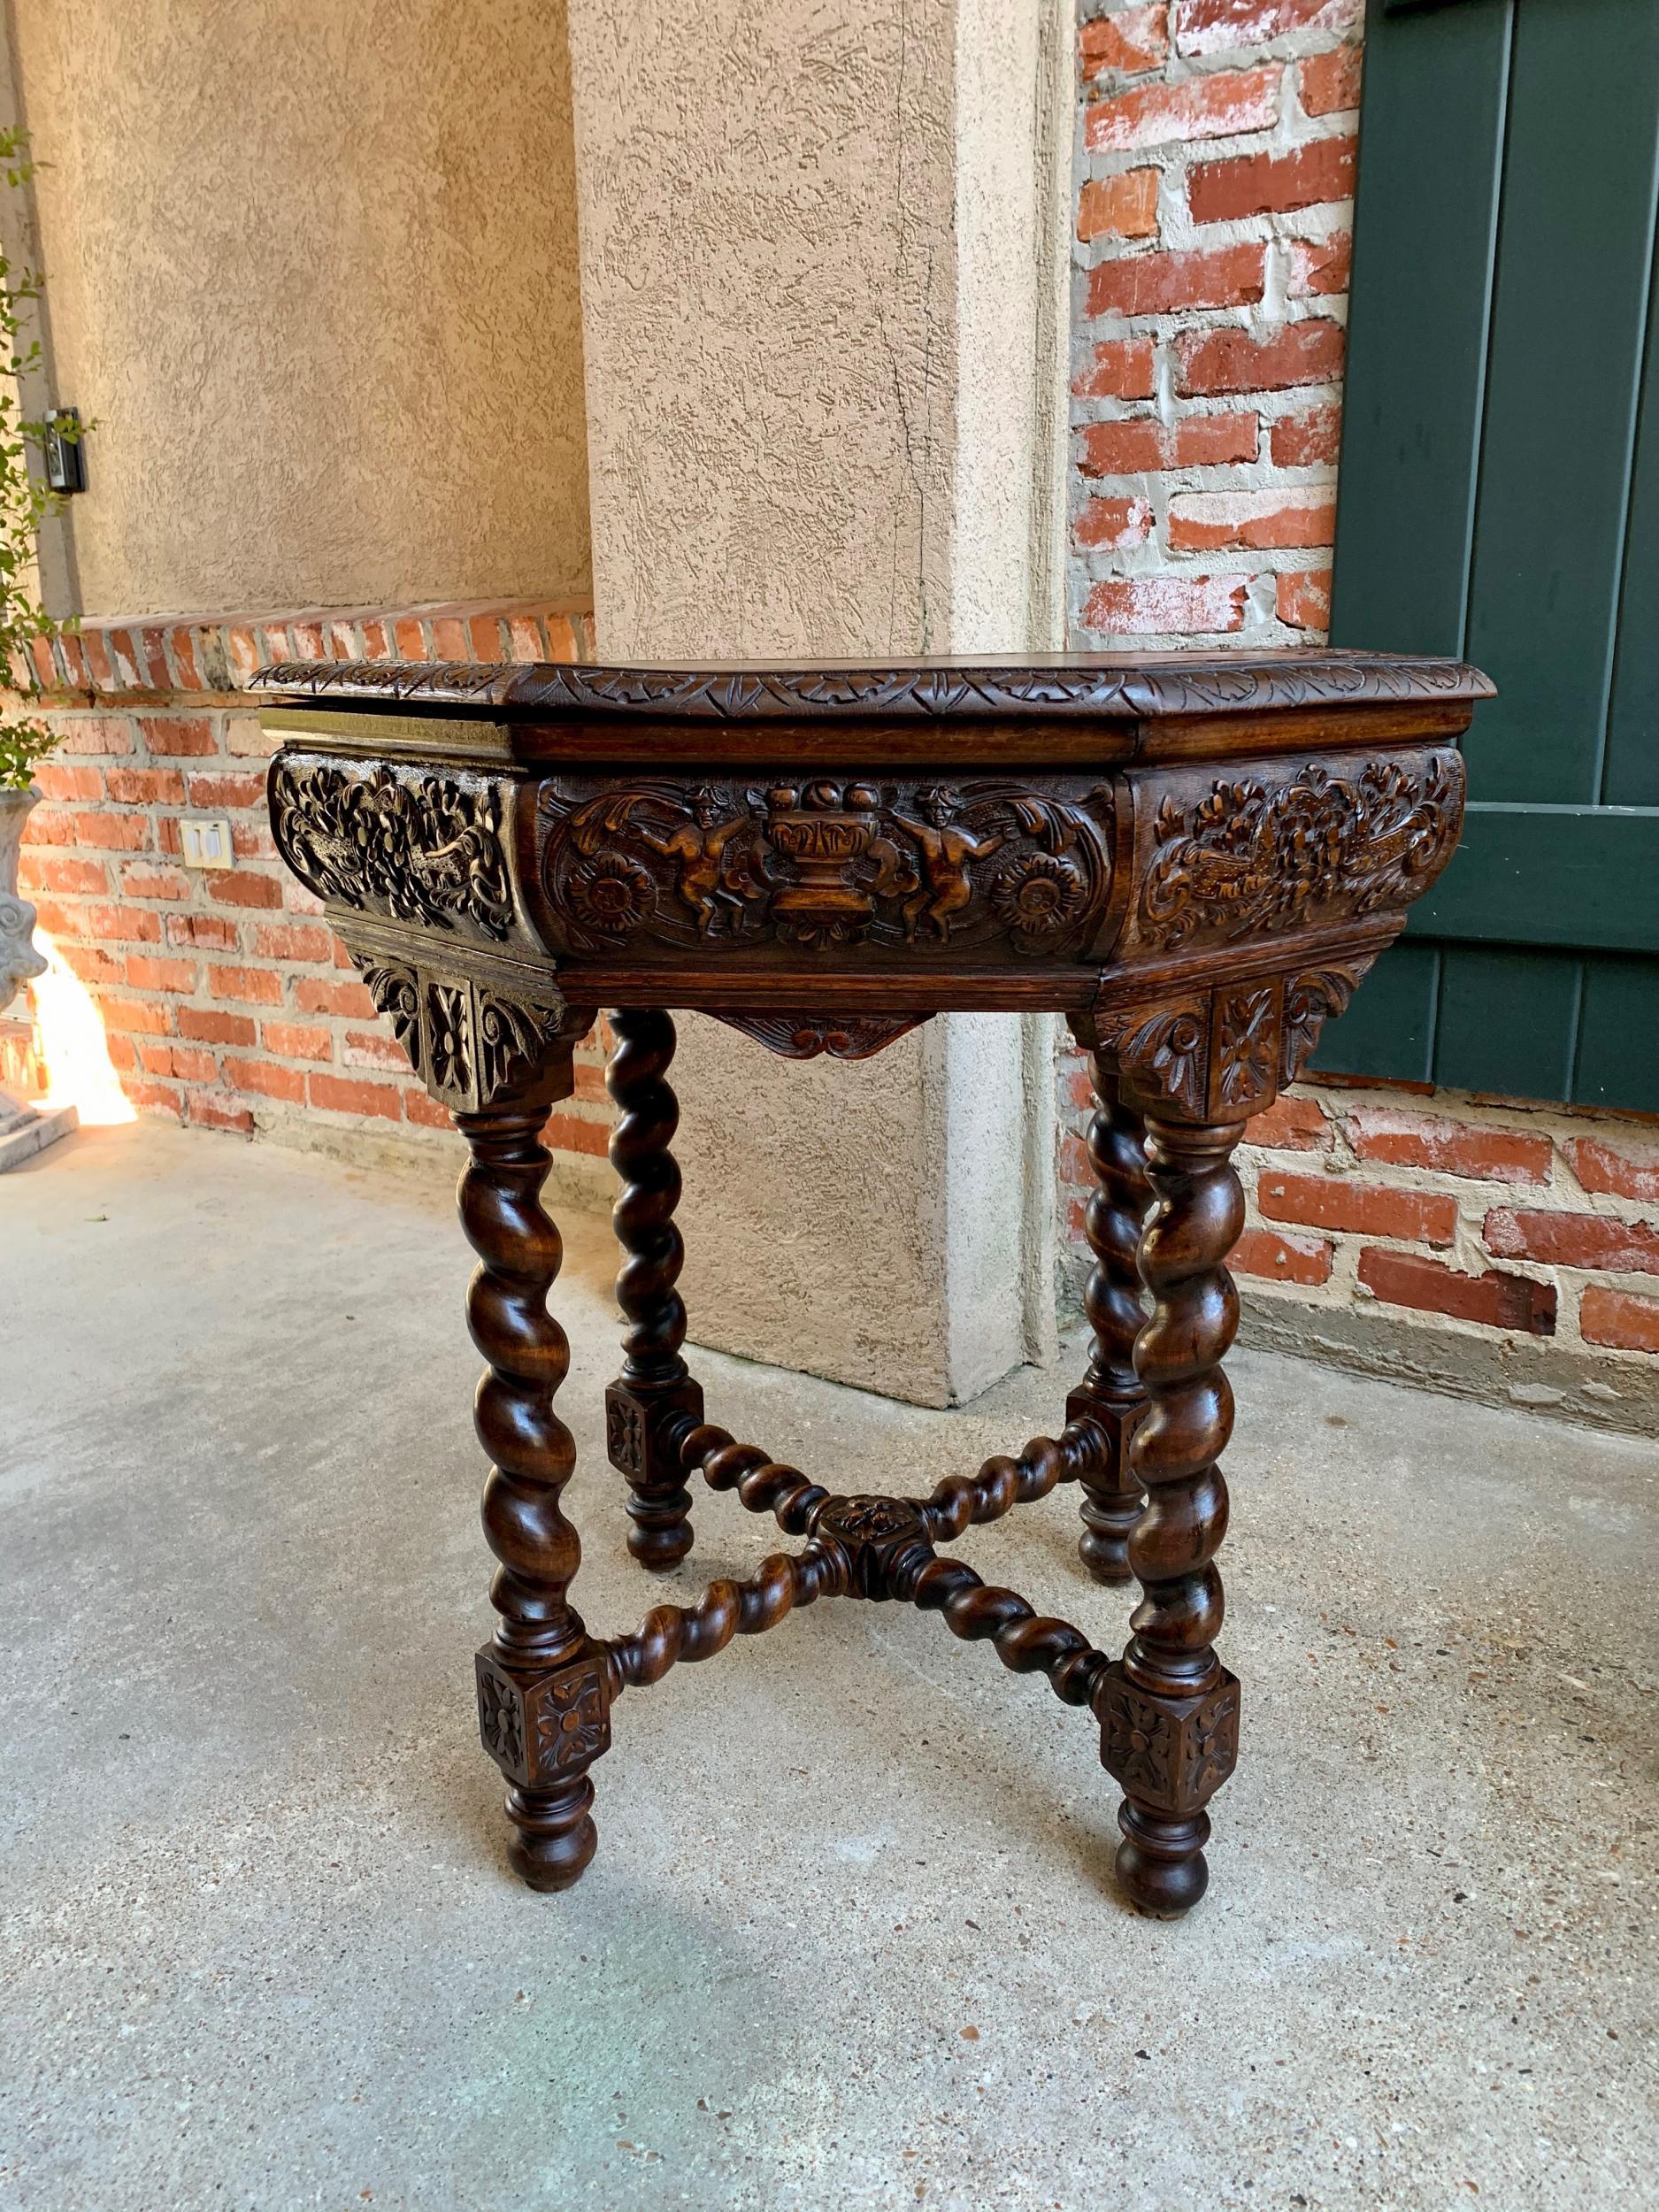 Antique French Octagon TABLE BARLEY TWIST Carved Oak Center Sofa Renaissance
 
~Direct from France~
~Ornately carved antique French “octagonal” table with impressive silhouette and commanding design!~
~(This style table was originally used with